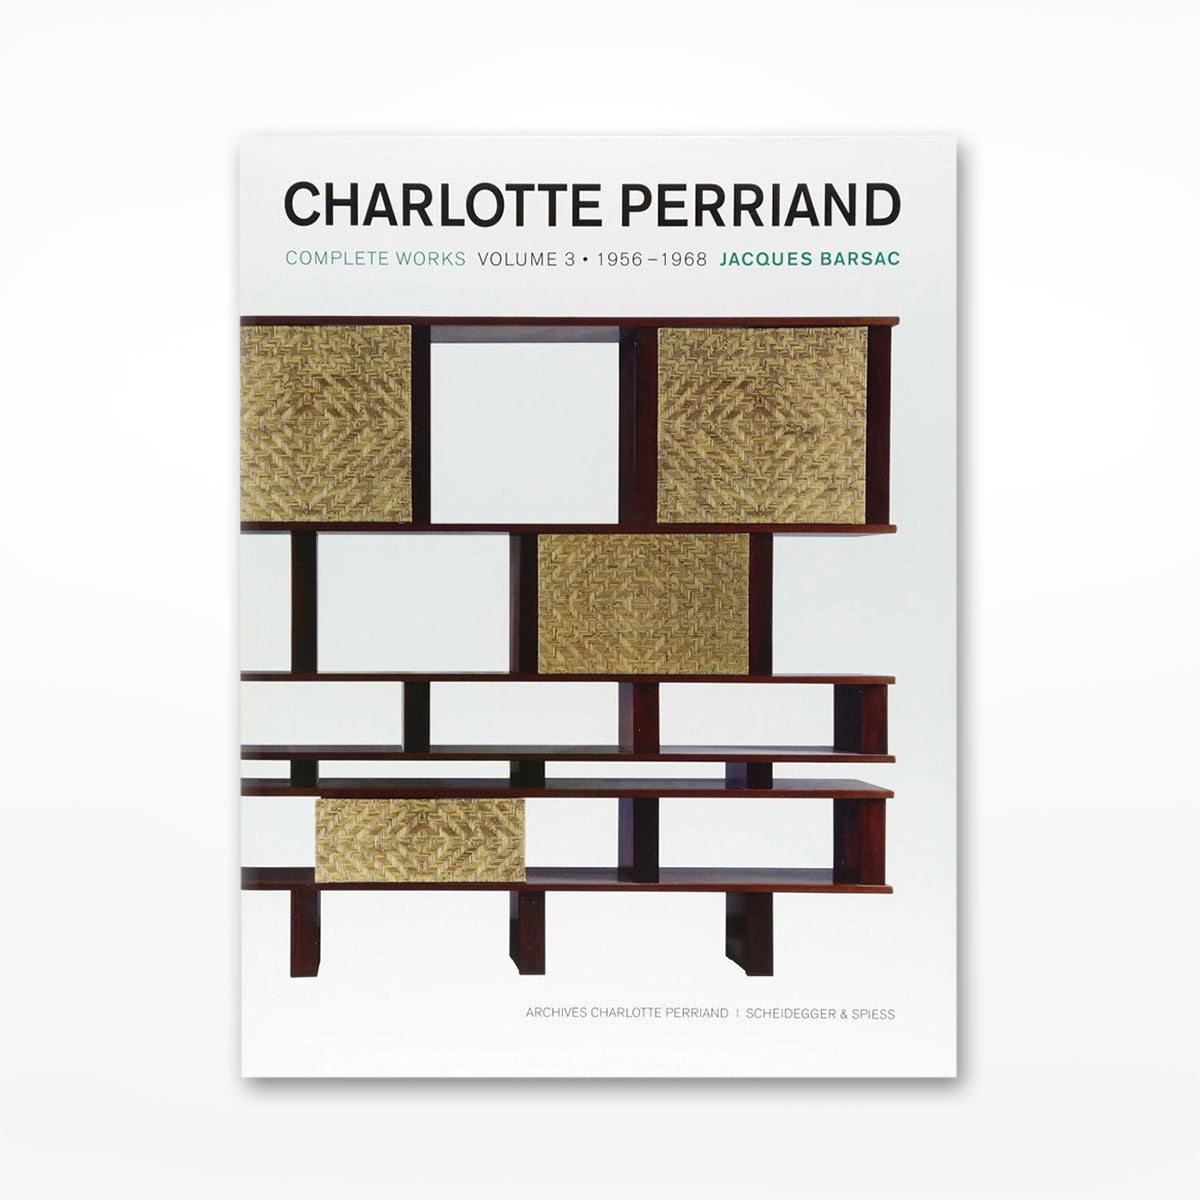 Charlotte Perriand: Complete Works Volume 3: 1955-1968